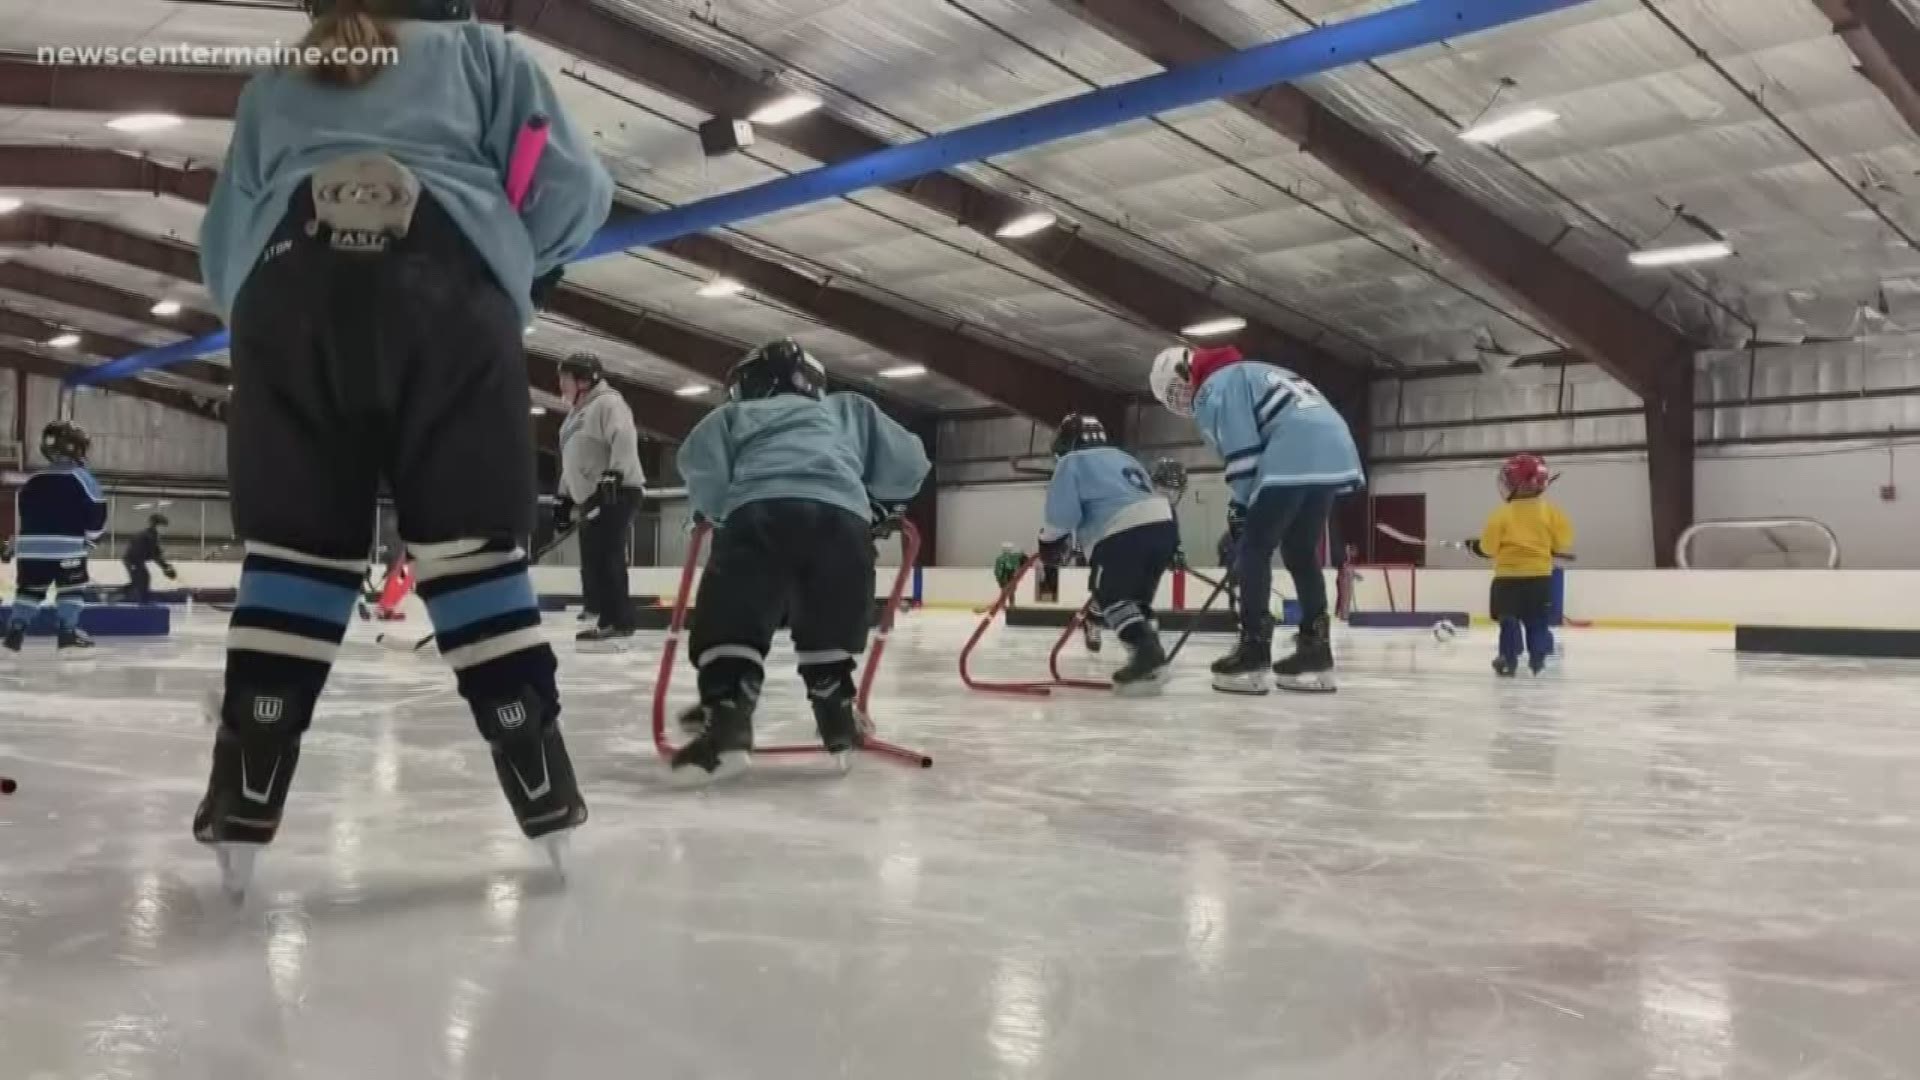 An 8-week program in Bangor teaches kids how to skate and much more.